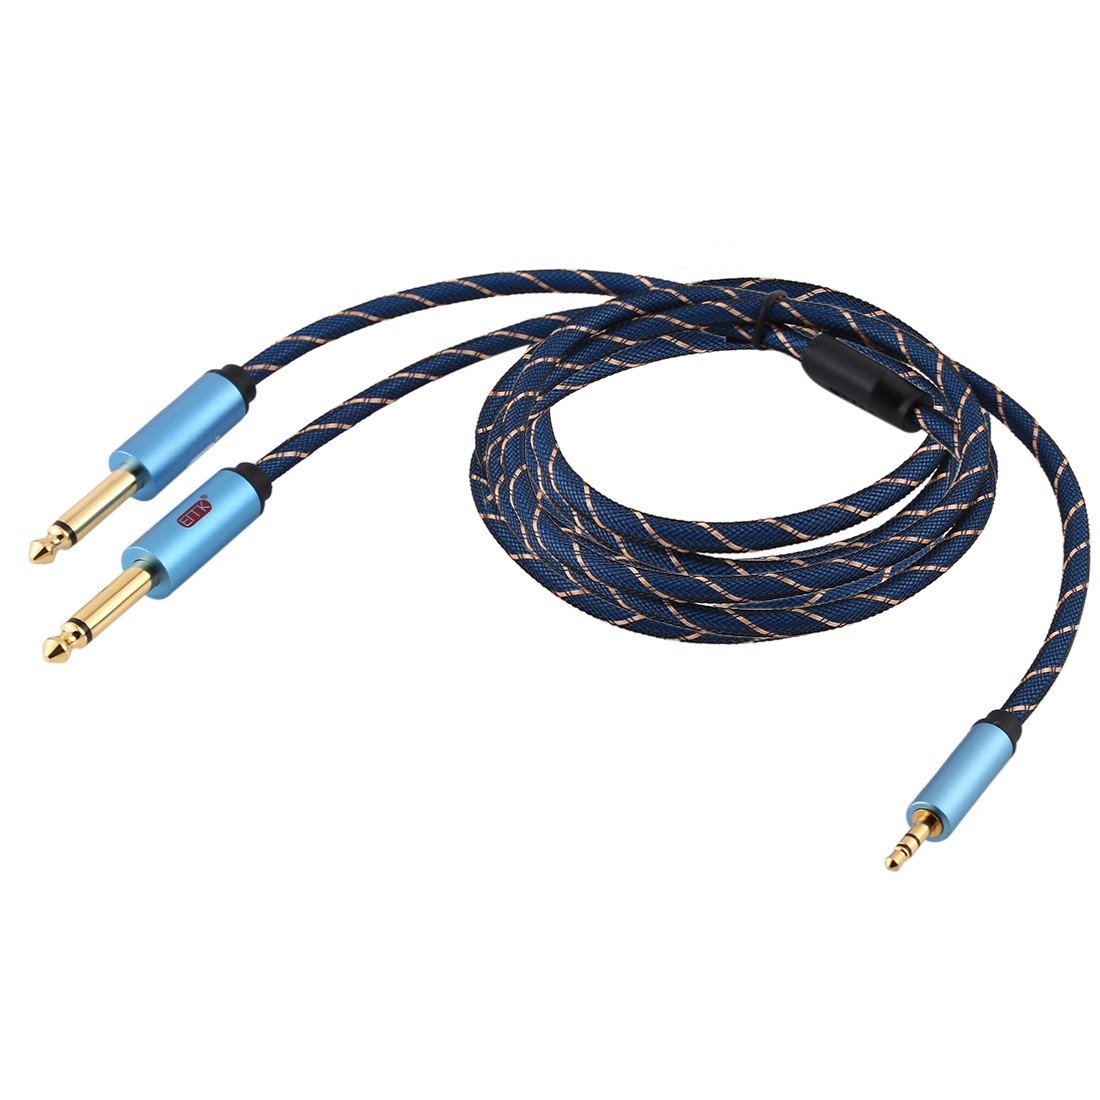 EMK 3.5mm Jack Male to 2 x 6.35mm Jack Male Gold Plated Connector Nylon Braid AUX Cable for Computer / X-BOX / PS3 / CD / DVD, Cable Length: 3m (Dark Blue)